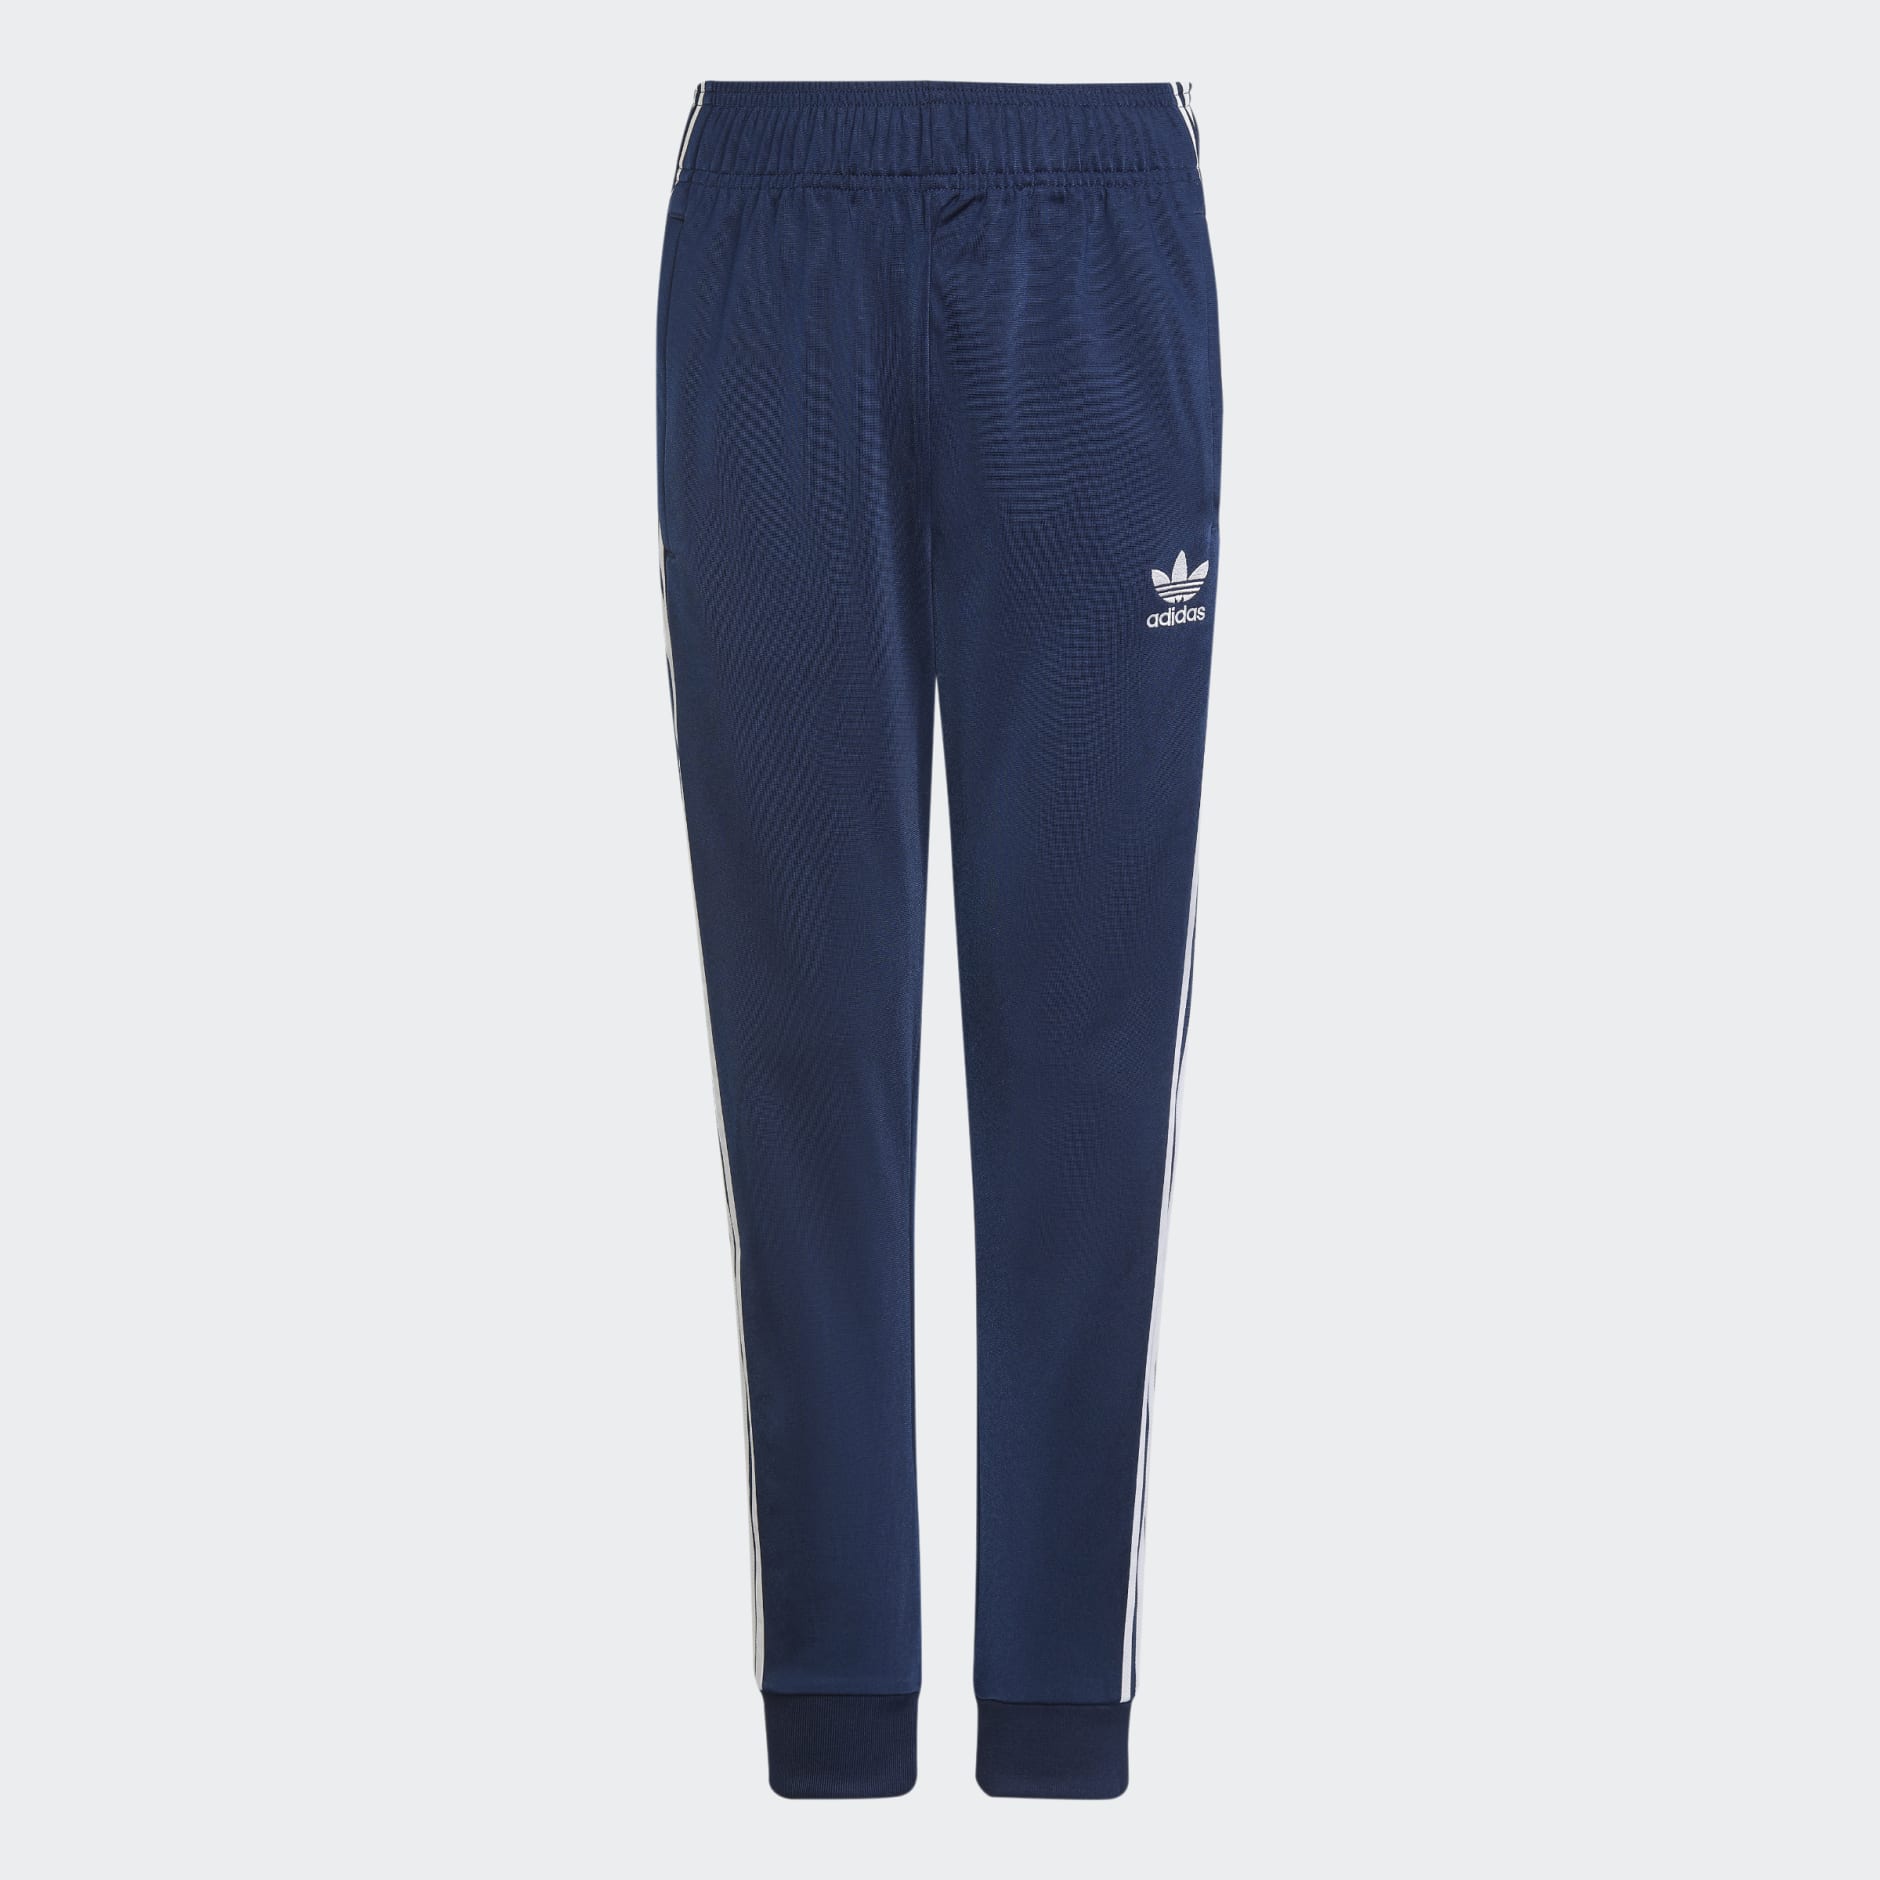 Clothing - Adicolor SST Track Pants - Blue | adidas South Africa